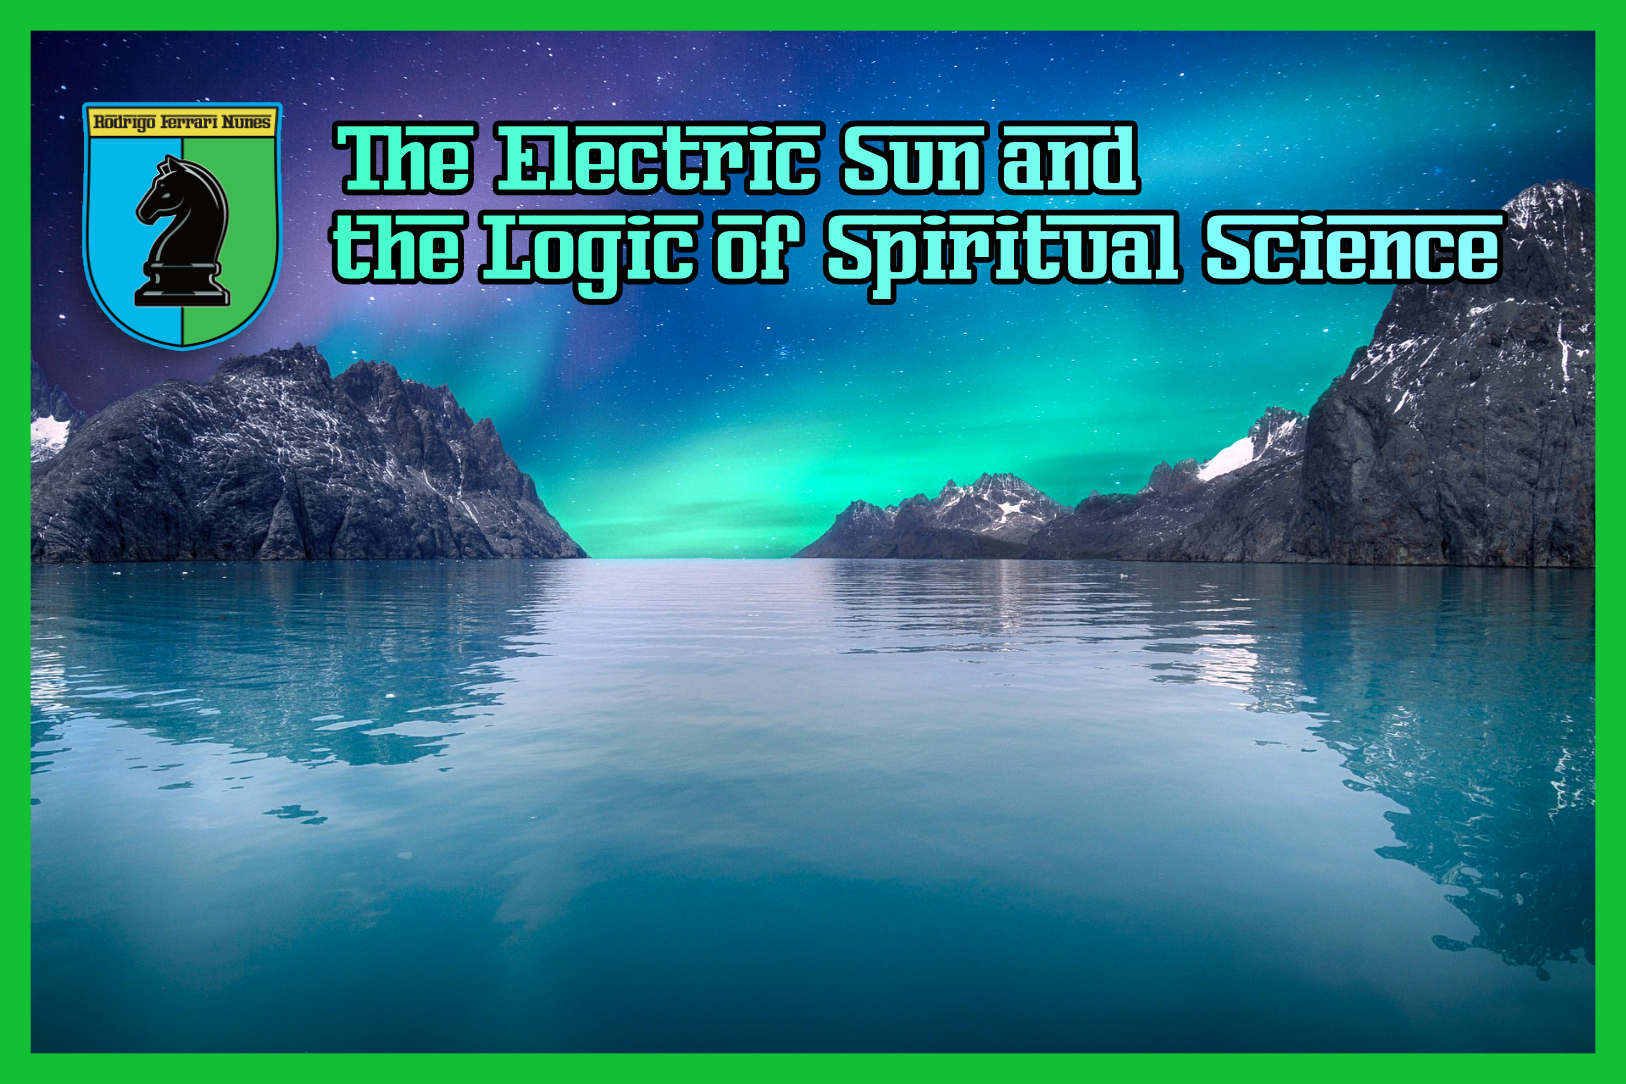 THE ELECTRIC SUN AND THE LOGIC OF SPIRITUAL SCIENCE